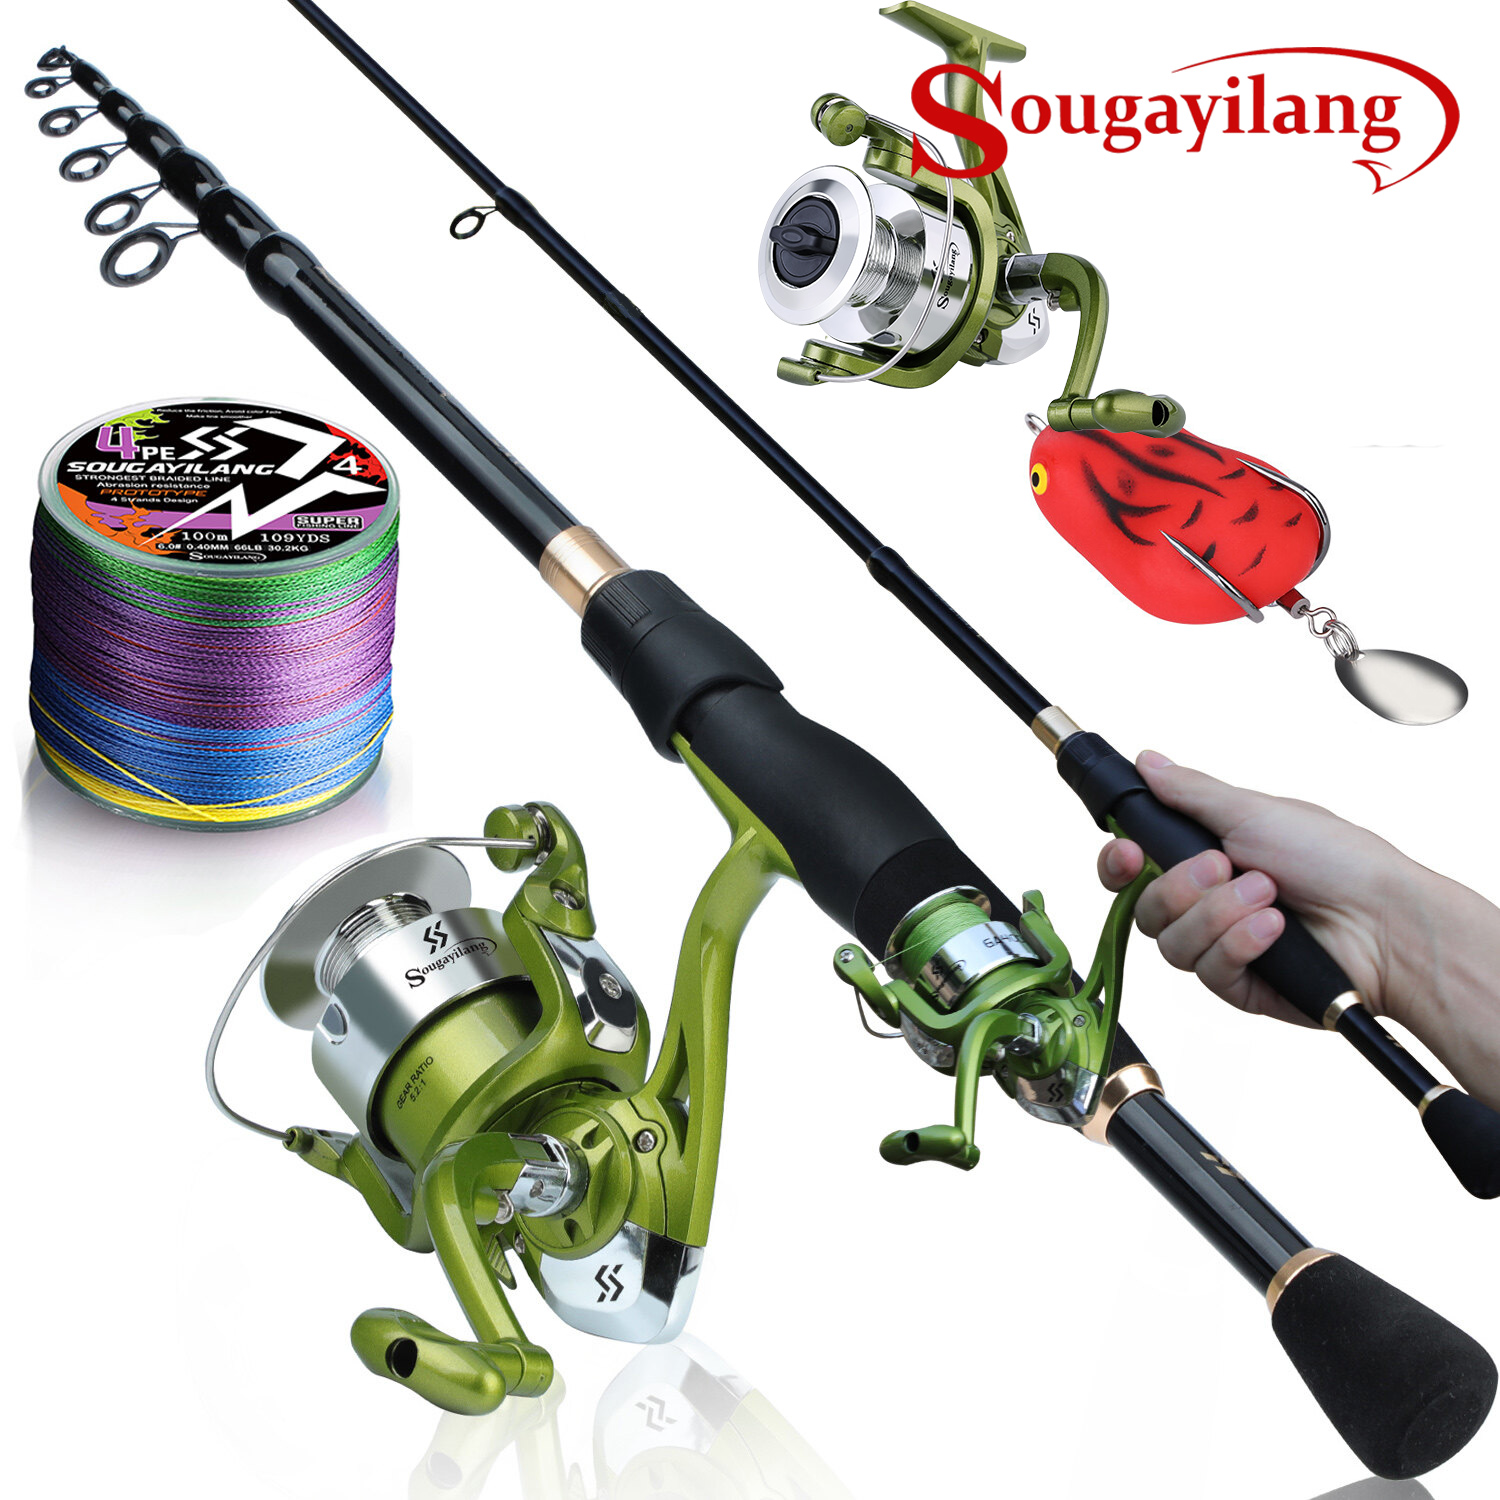 210 cm fishing rod and reel with frog lure set combo